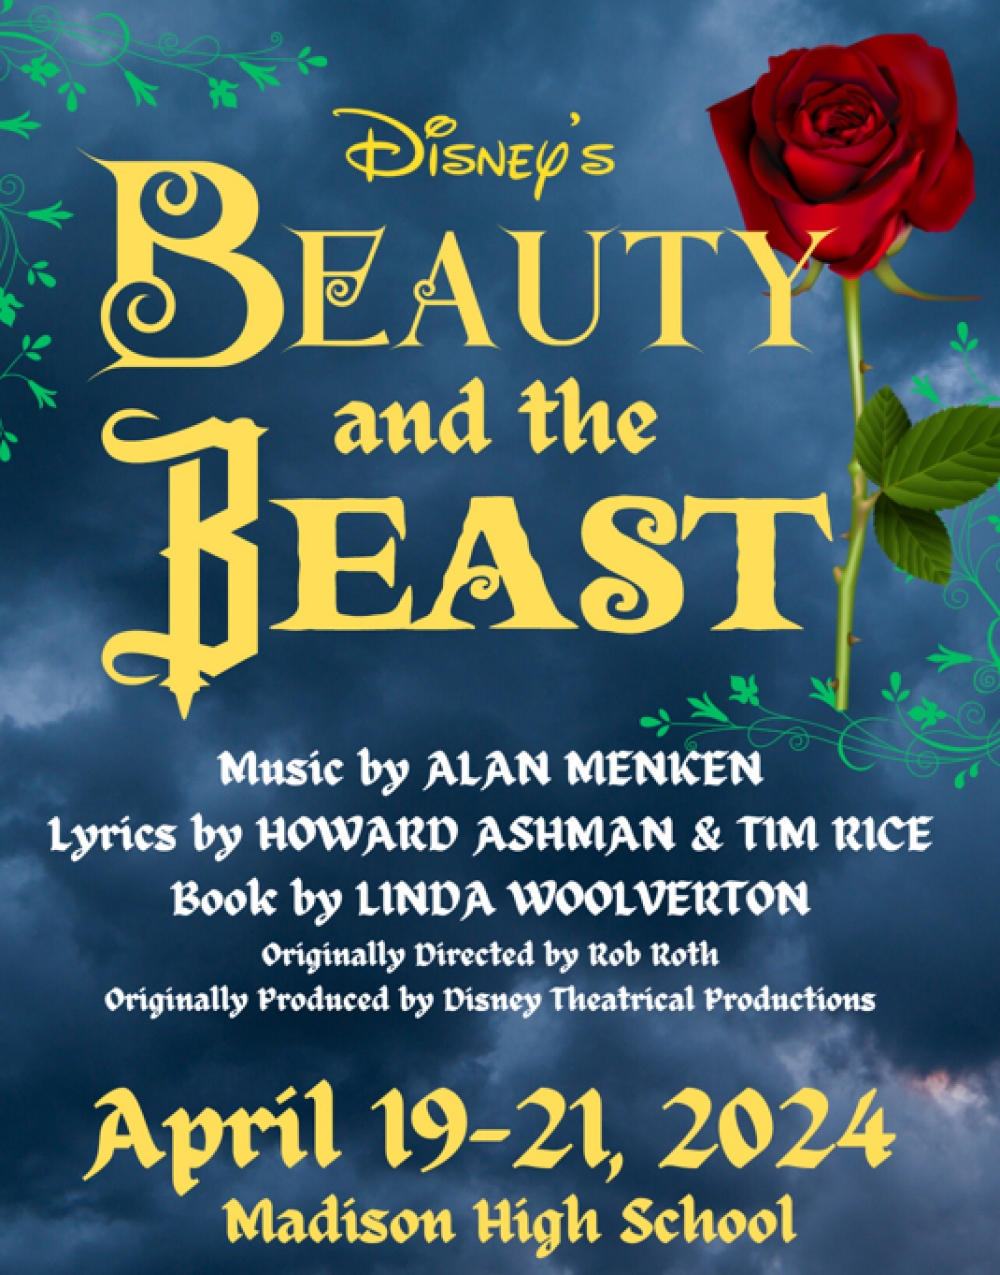 Disney's Beauty and the Beast at Madison High School Theatre